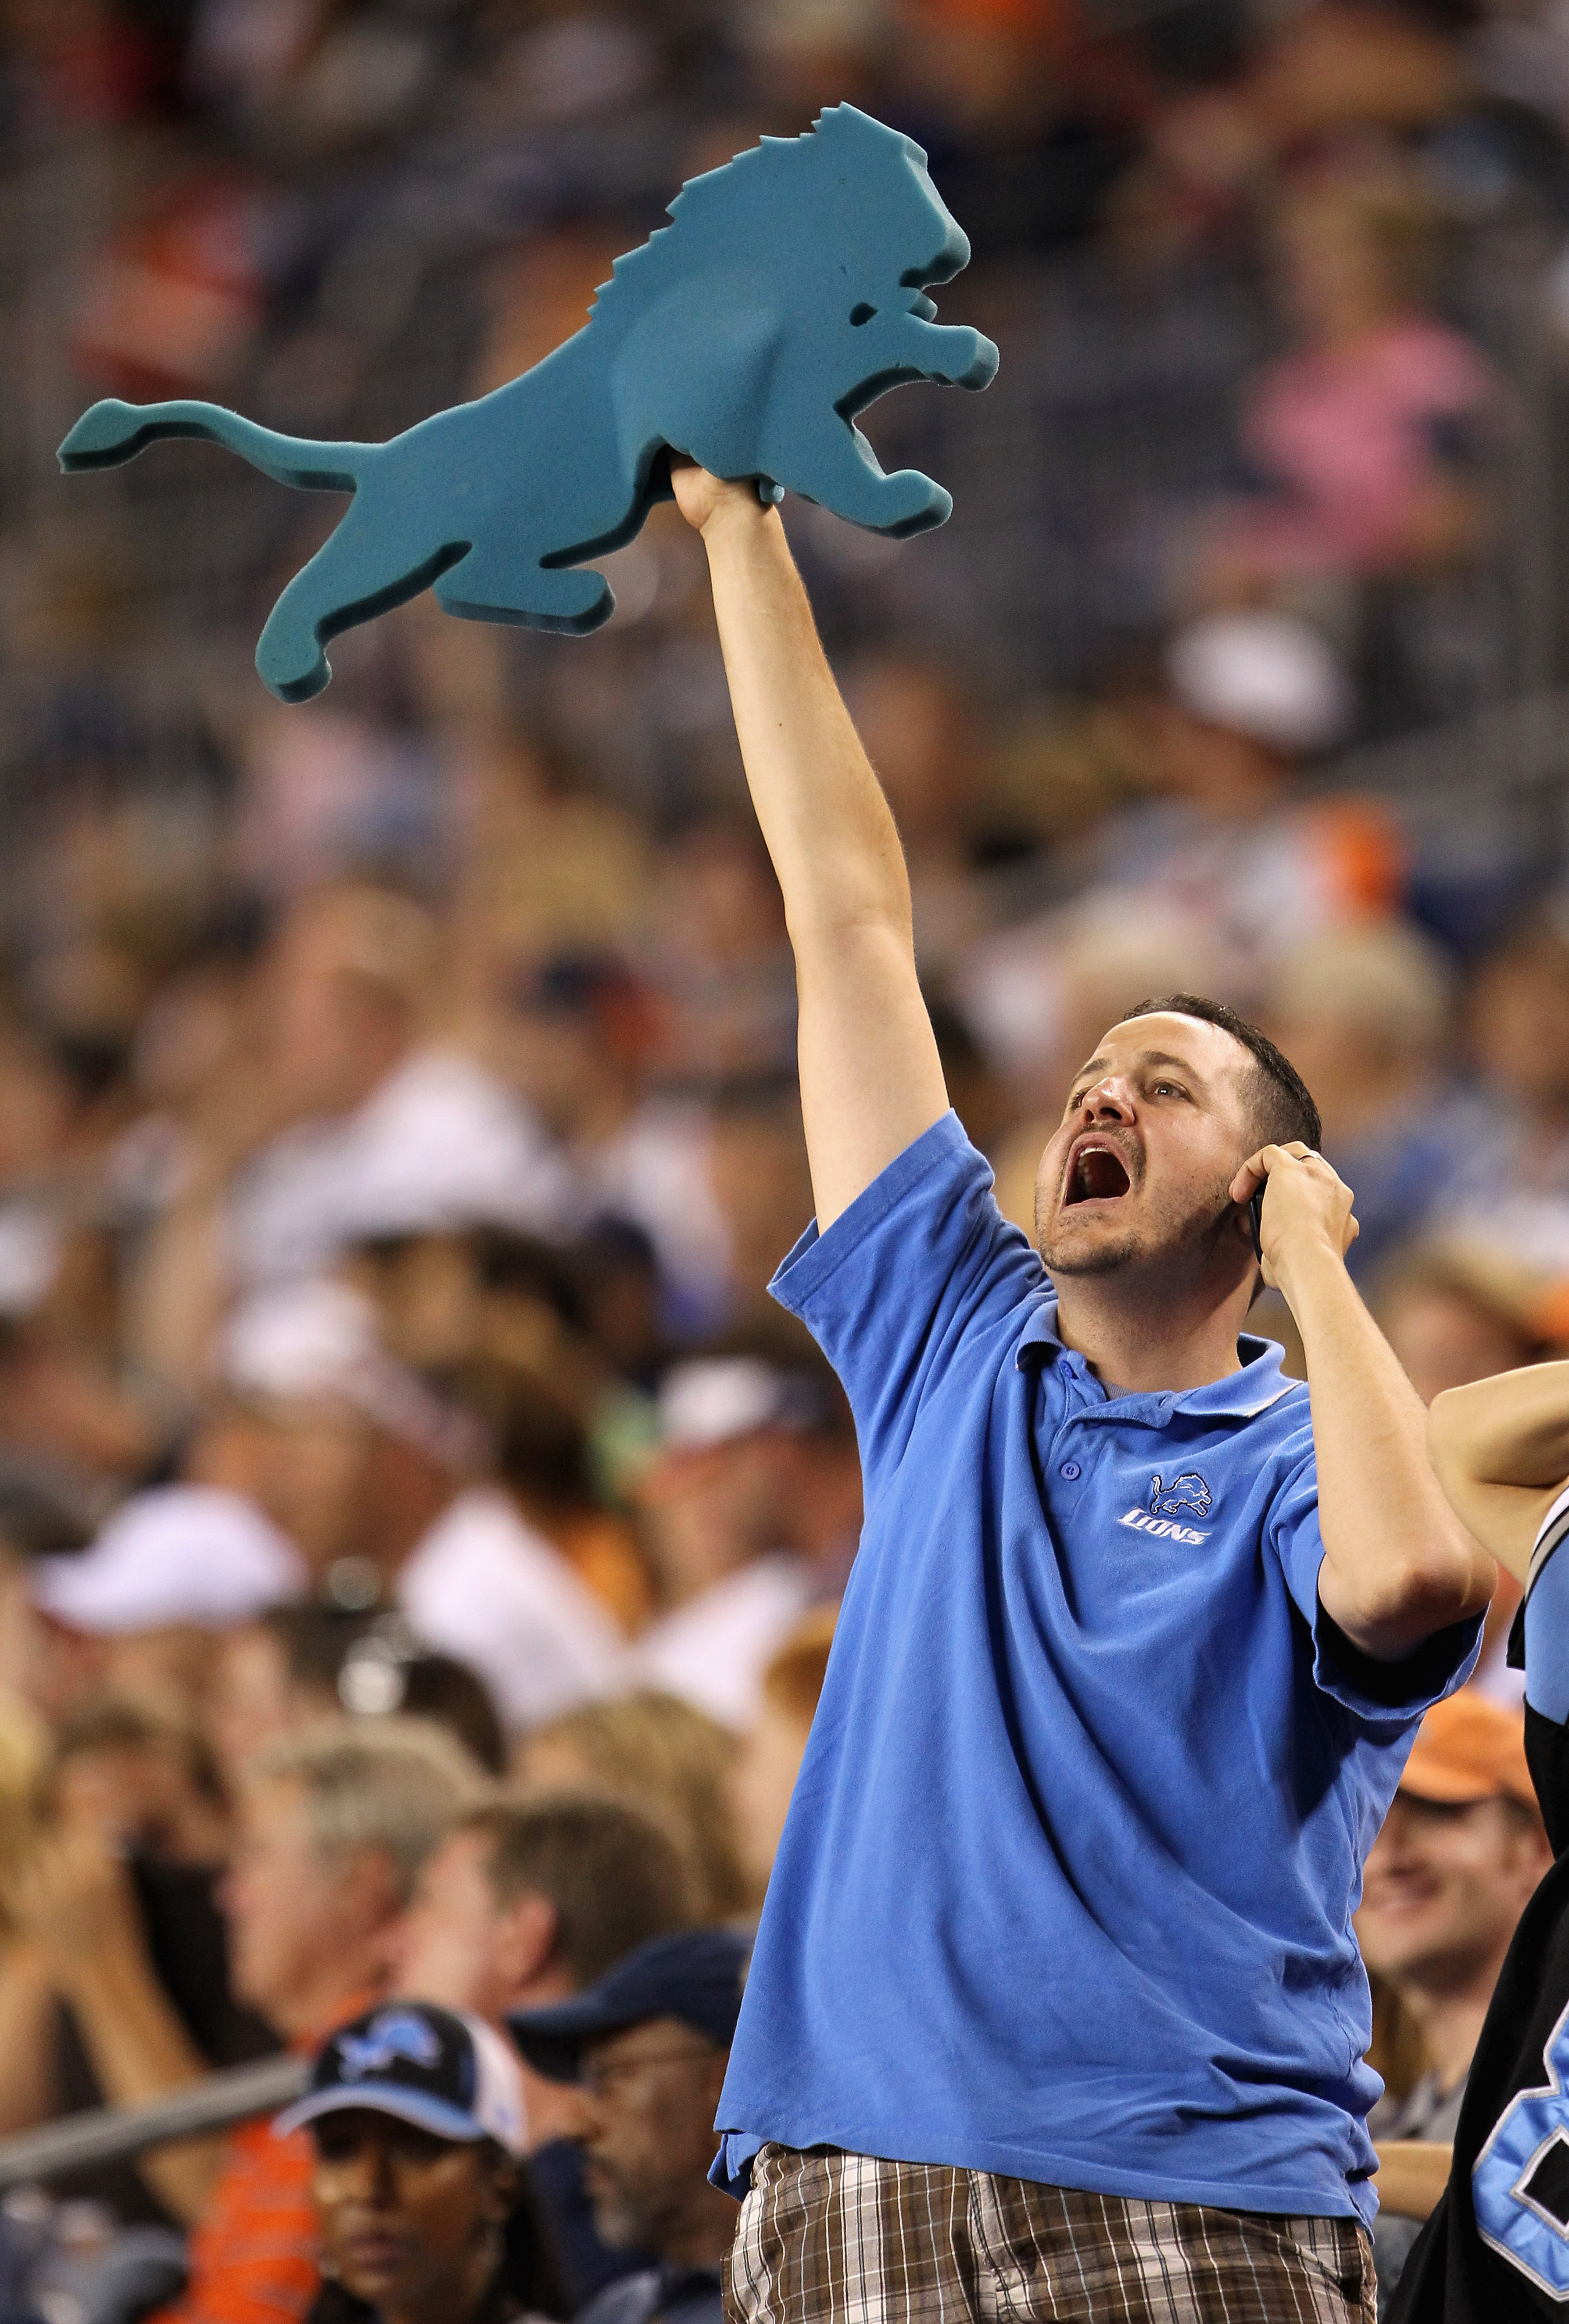 DENVER - AUGUST 21:  A Detroit Lions fans celebrates as the Lions face the Denver Broncos during preseason NFL action at INVESCO Field at Mile High on August 21, 2010 in Denver, Colorado. The Lions defeated the Broncos 25-20.  (Photo by Doug Pensinger/Get